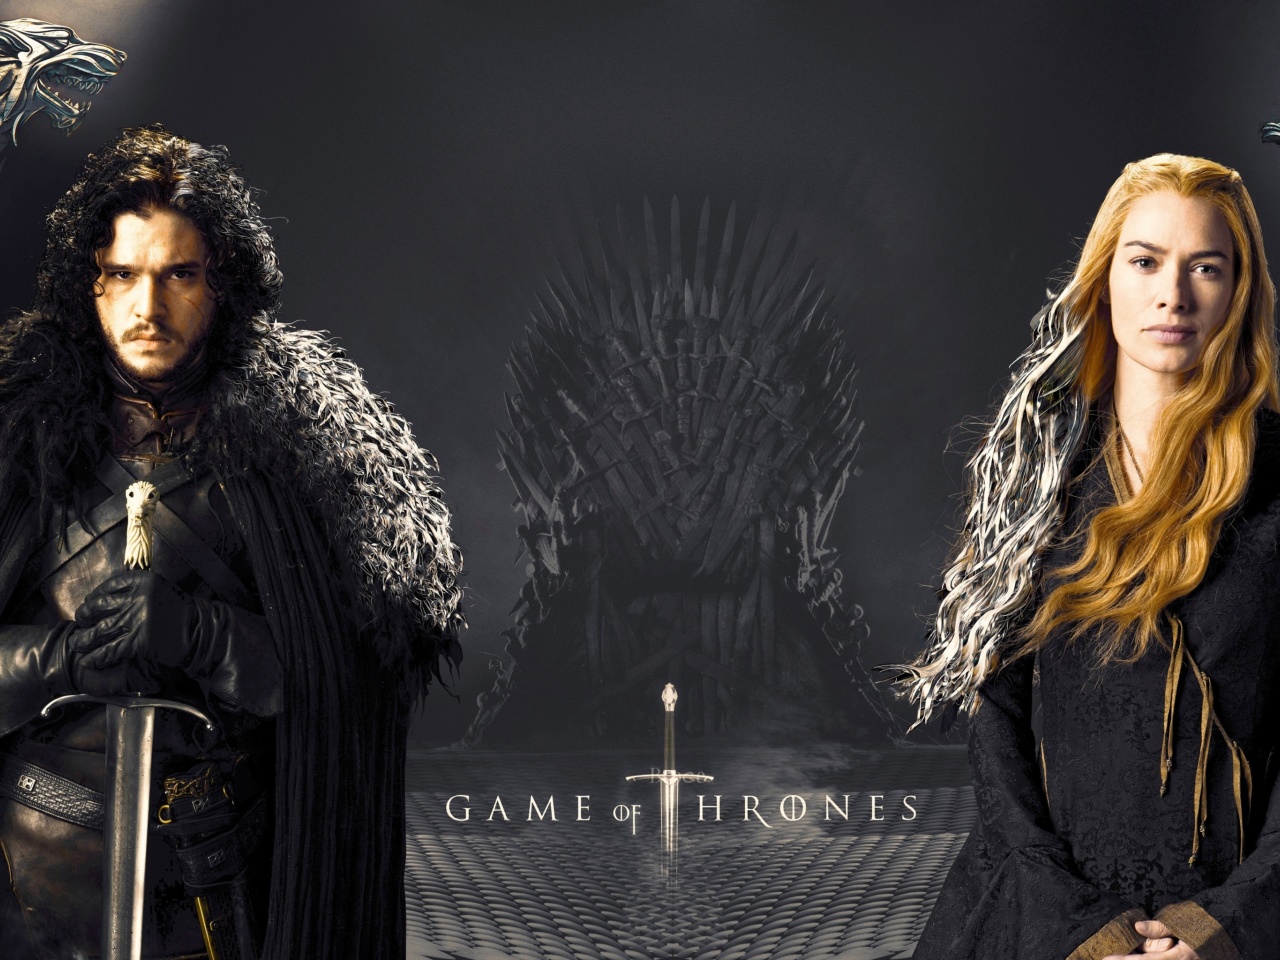 Game Of Thrones actors Jon Snow and Cersei Lannister wallpaper 1280x960